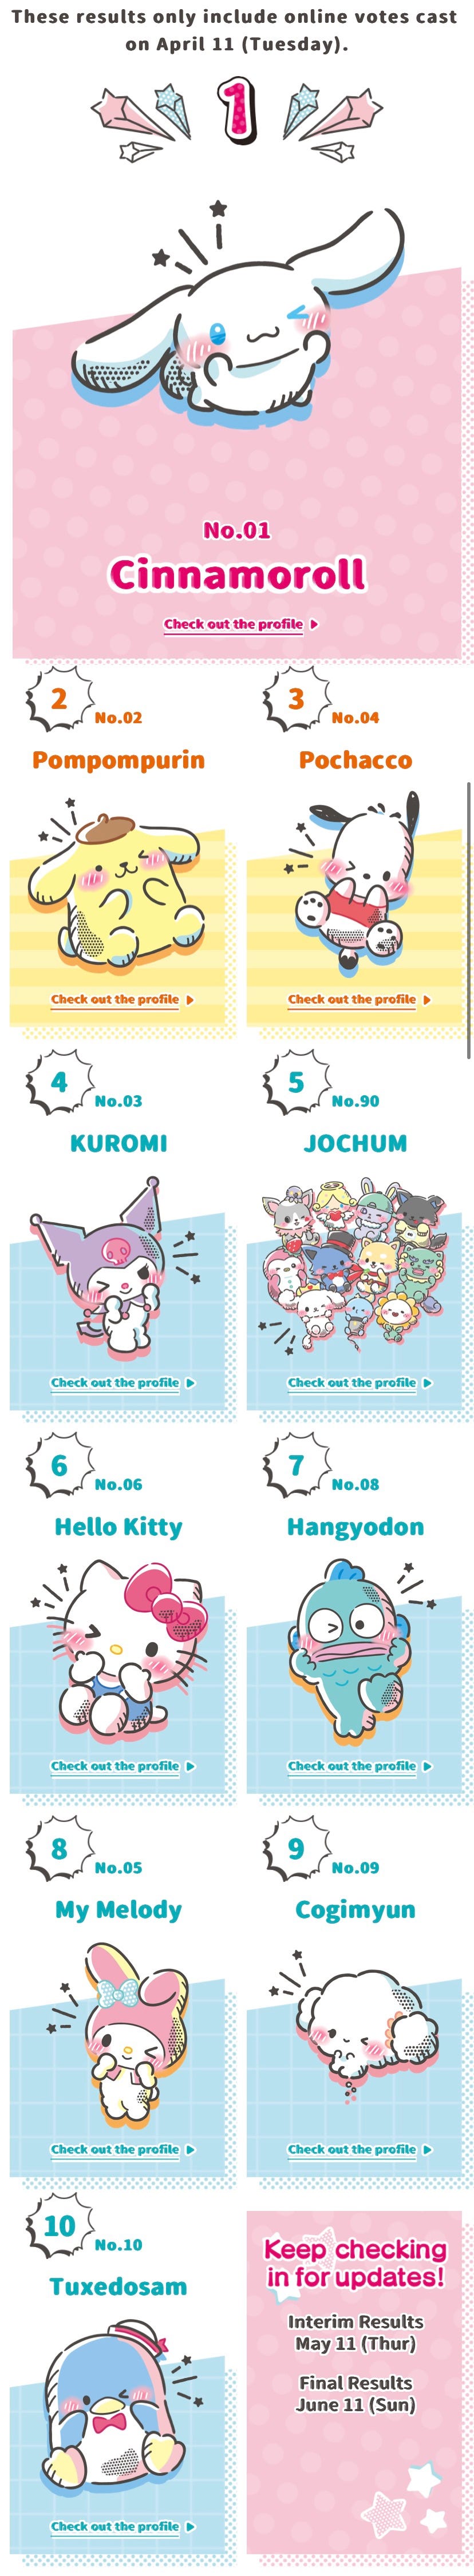 33rd Annual Sanrio Character Ranking Has Begun. Vote Now Until 10th June.